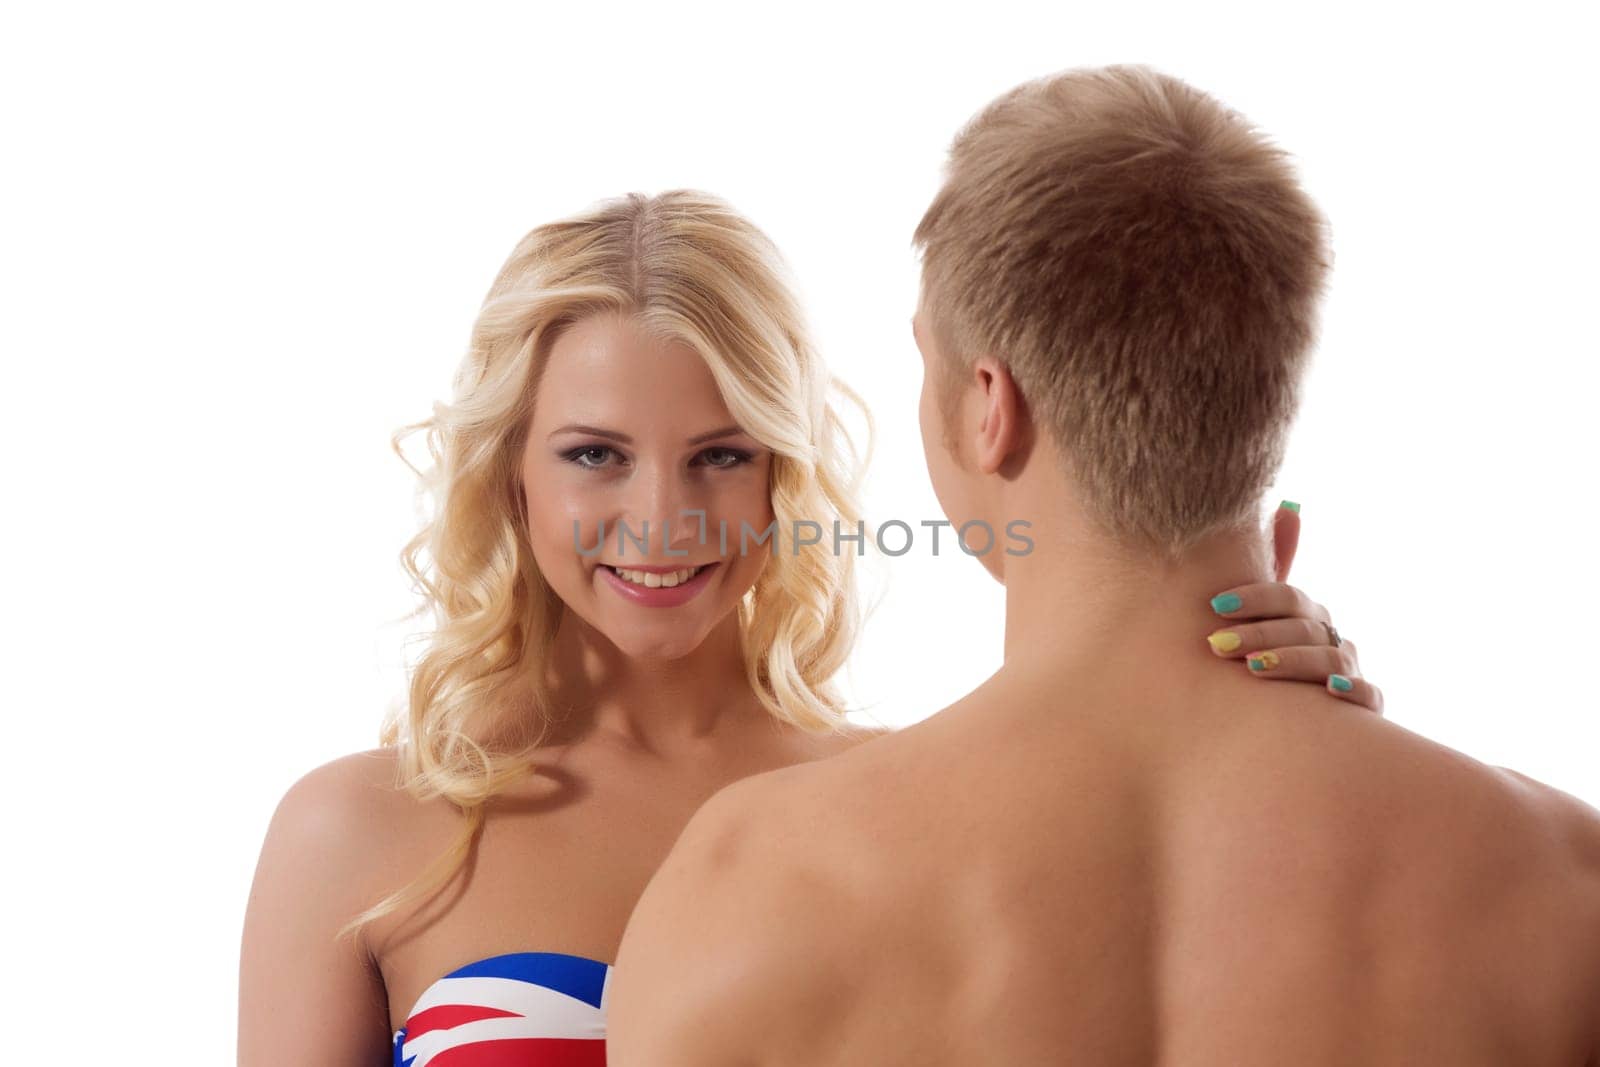 Smiling blonde touching her boyfriend's neck, isolated on white